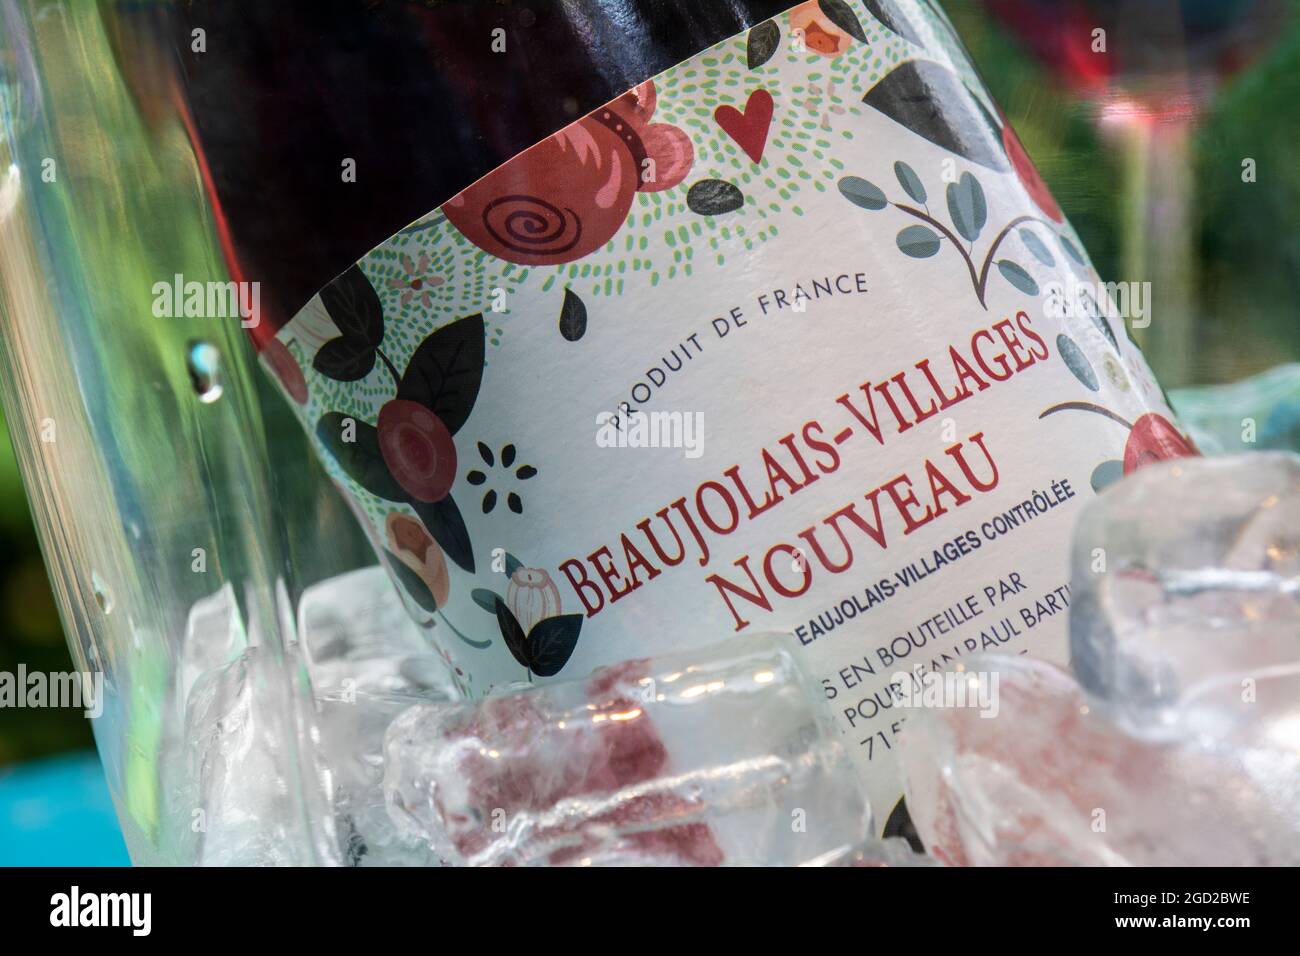 Beaujolais-Villages Nouveau French young red wine placed in iced wine cooler to drink traditionally slightly chilled alfresco summer garden situation Stock Photo